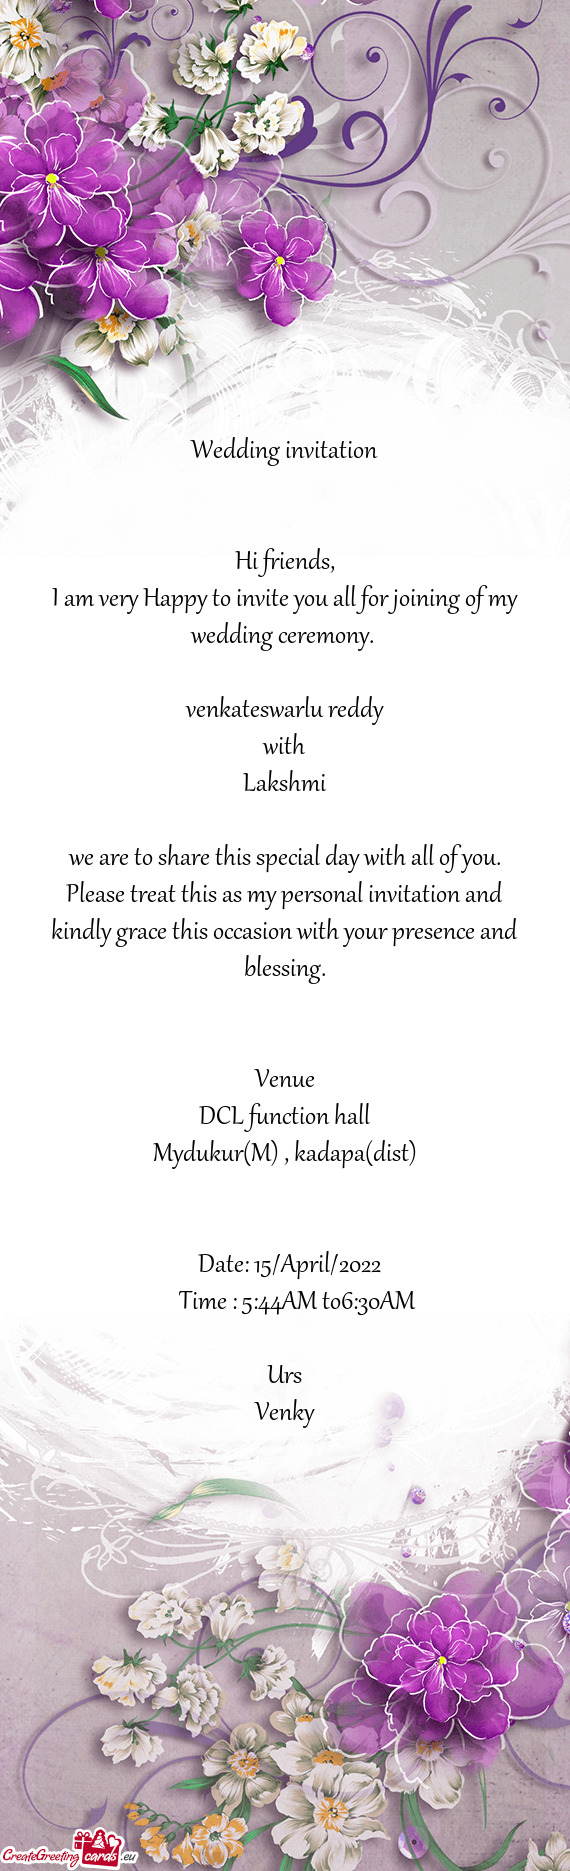 I am very Happy to invite you all for joining of my wedding ceremony